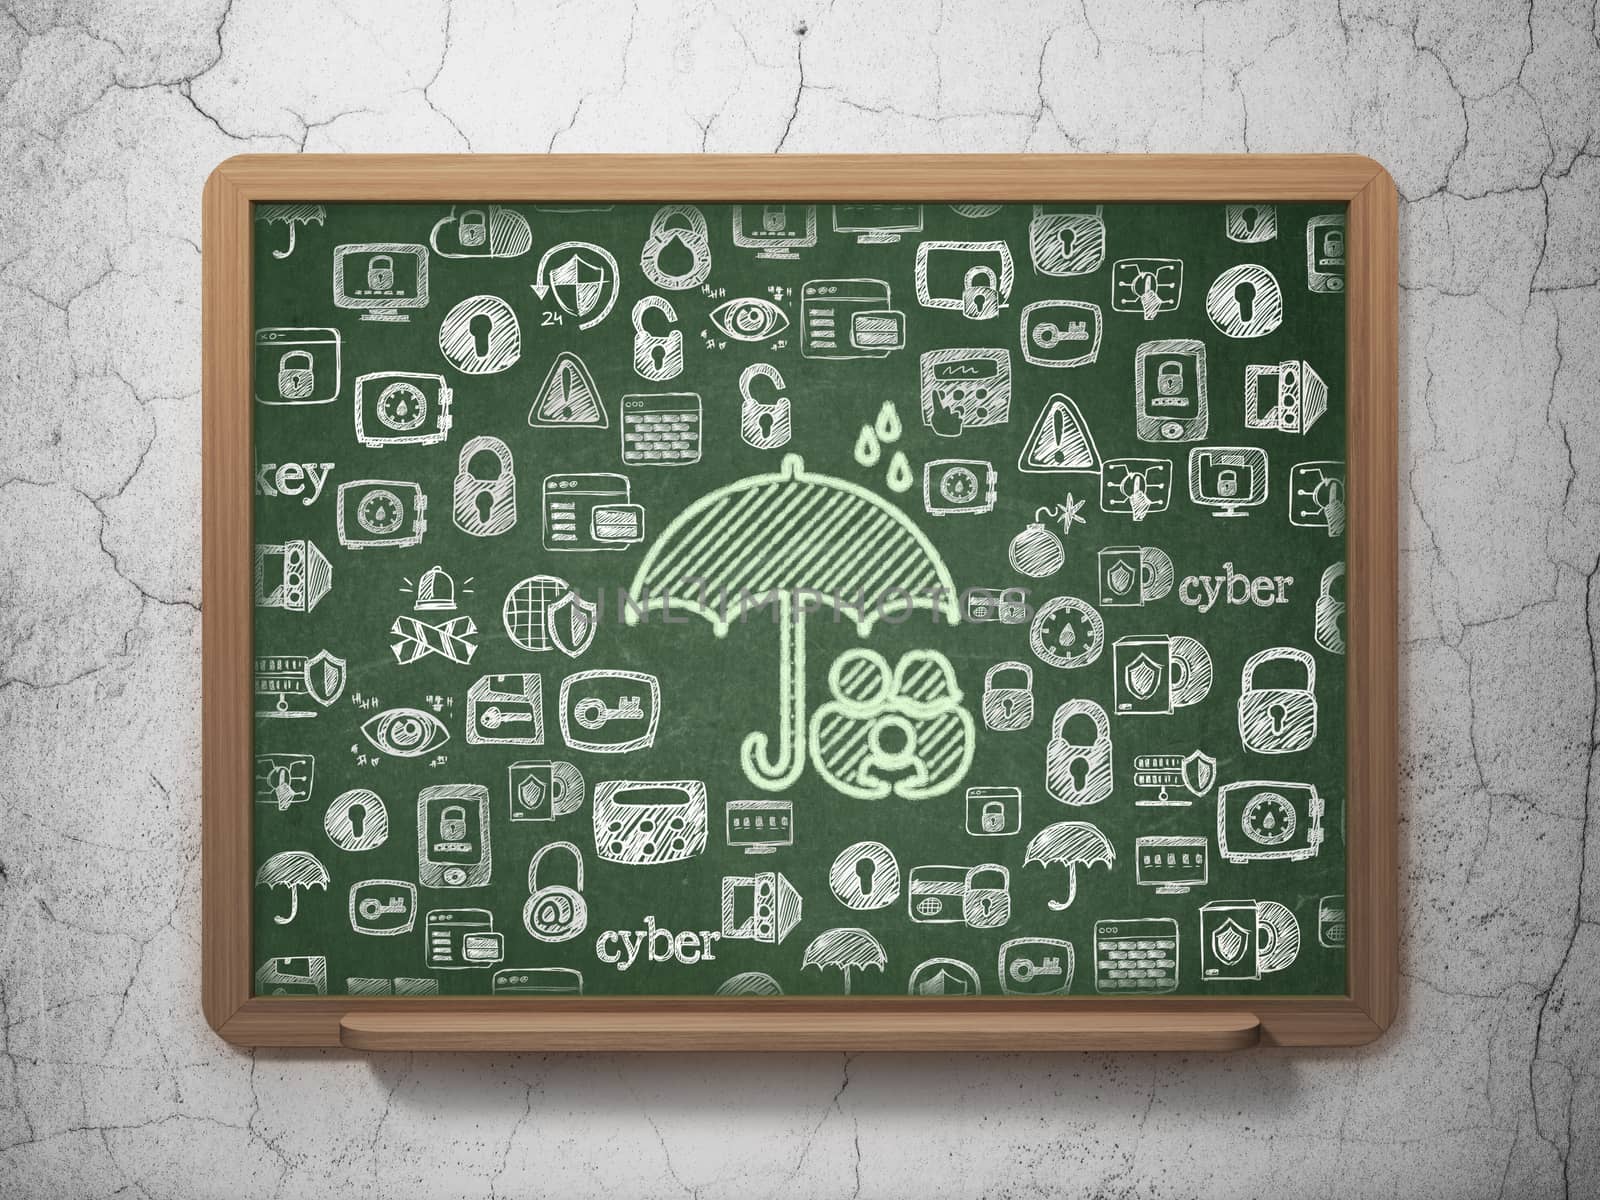 Protection concept: Chalk Green Family And Umbrella icon on School board background with  Hand Drawn Security Icons, 3D Rendering